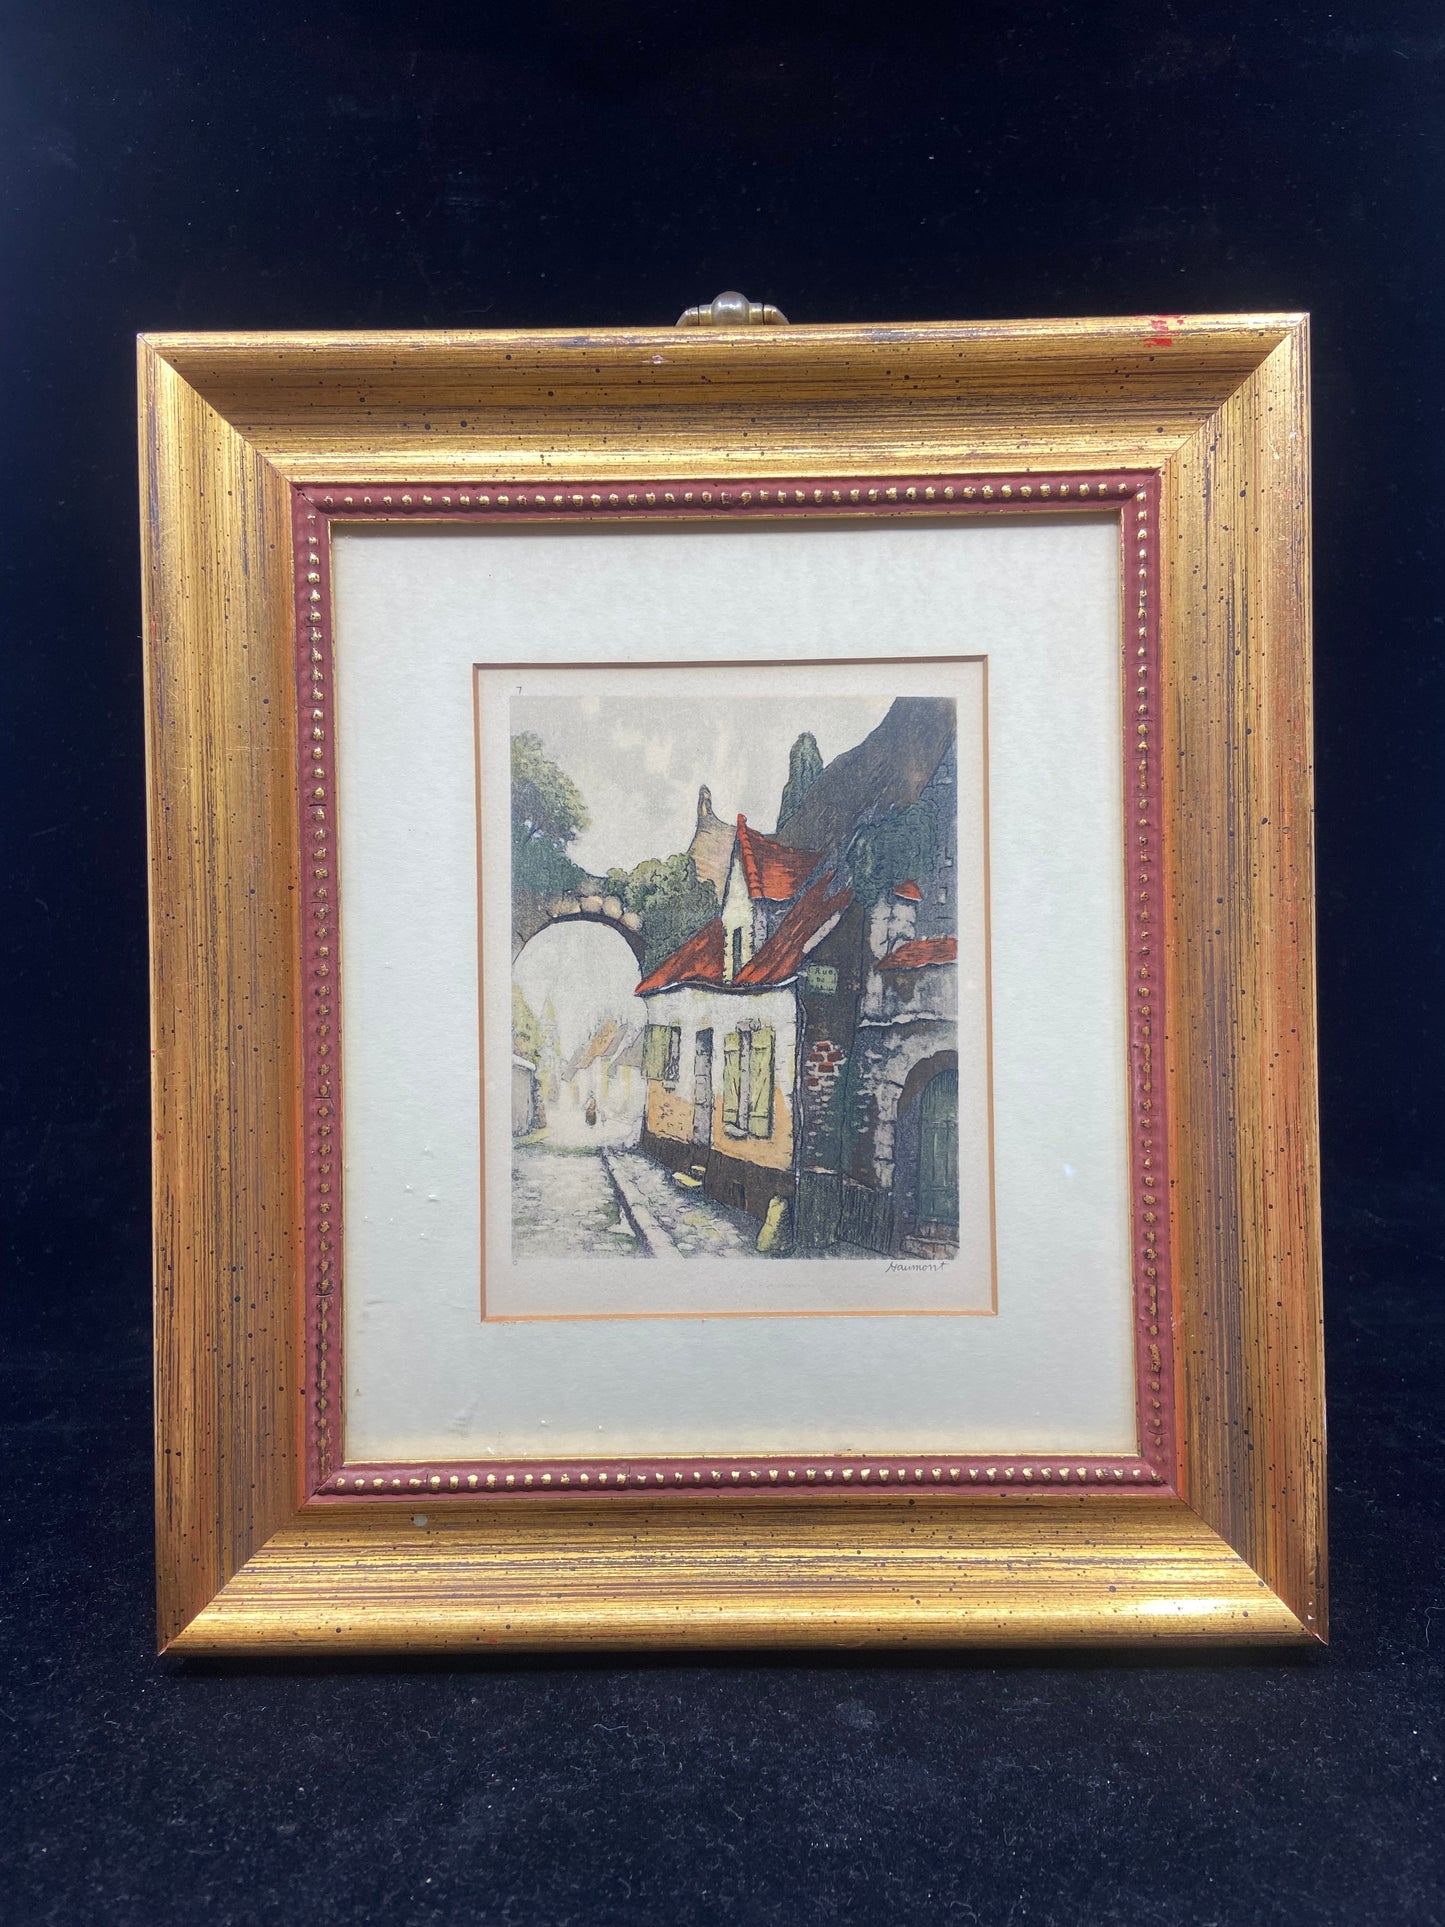 Haumont Framed House Engraving